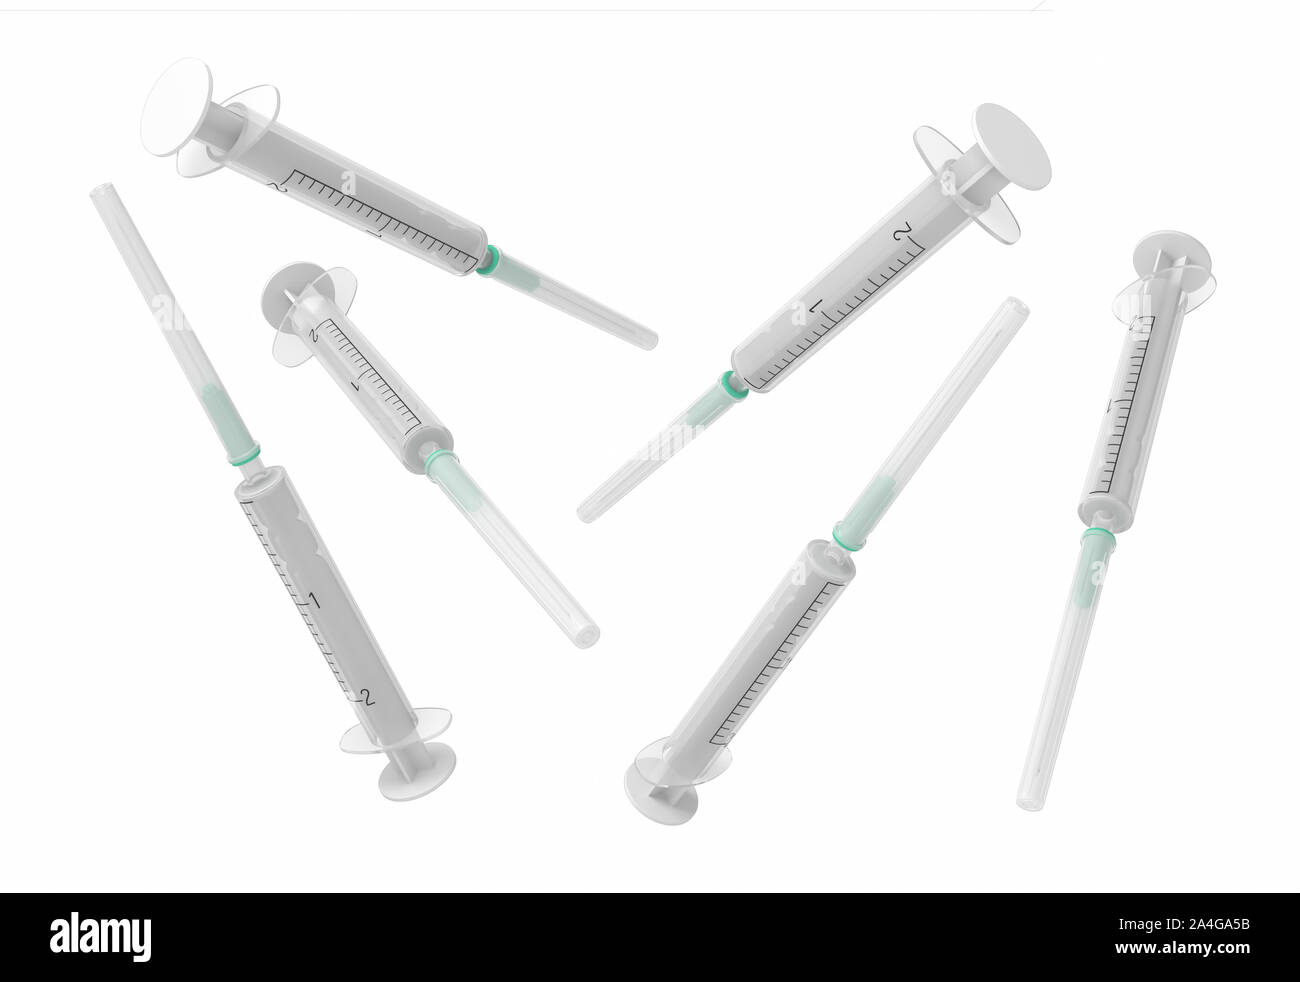 3d rendering set of safety medical syringes with needles isolated on white background. Medicine and health. Healthcare industry. Medical instruments a Stock Photo